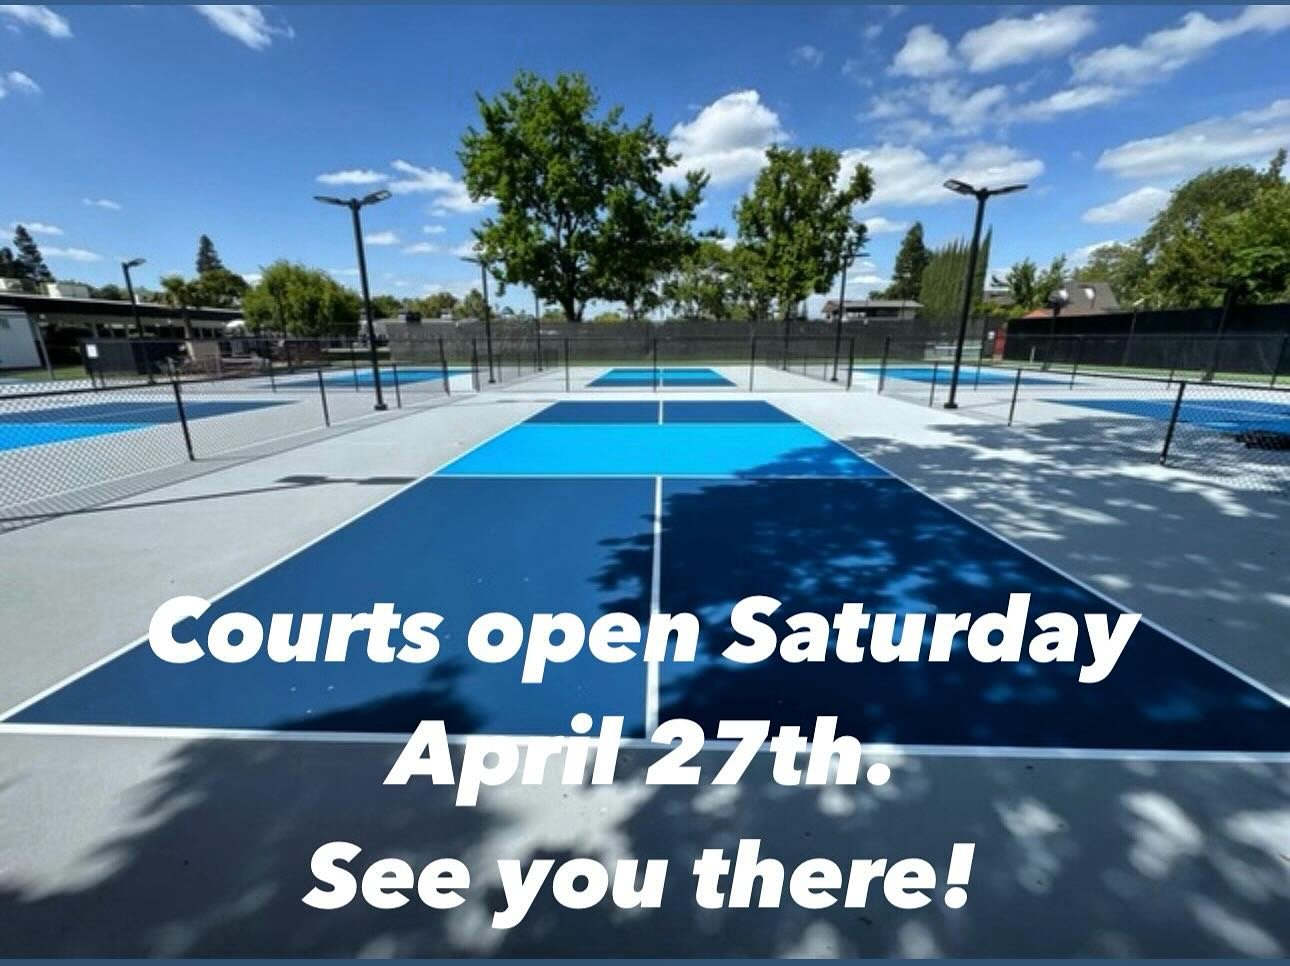 We are thrilled to announce the opening of our brand new pickleball courts is going to happen this Saturday, April 27th. Bring your friends and your equipment to help us break in the new courts! We DINK you&rsquo;re going to like them 😉